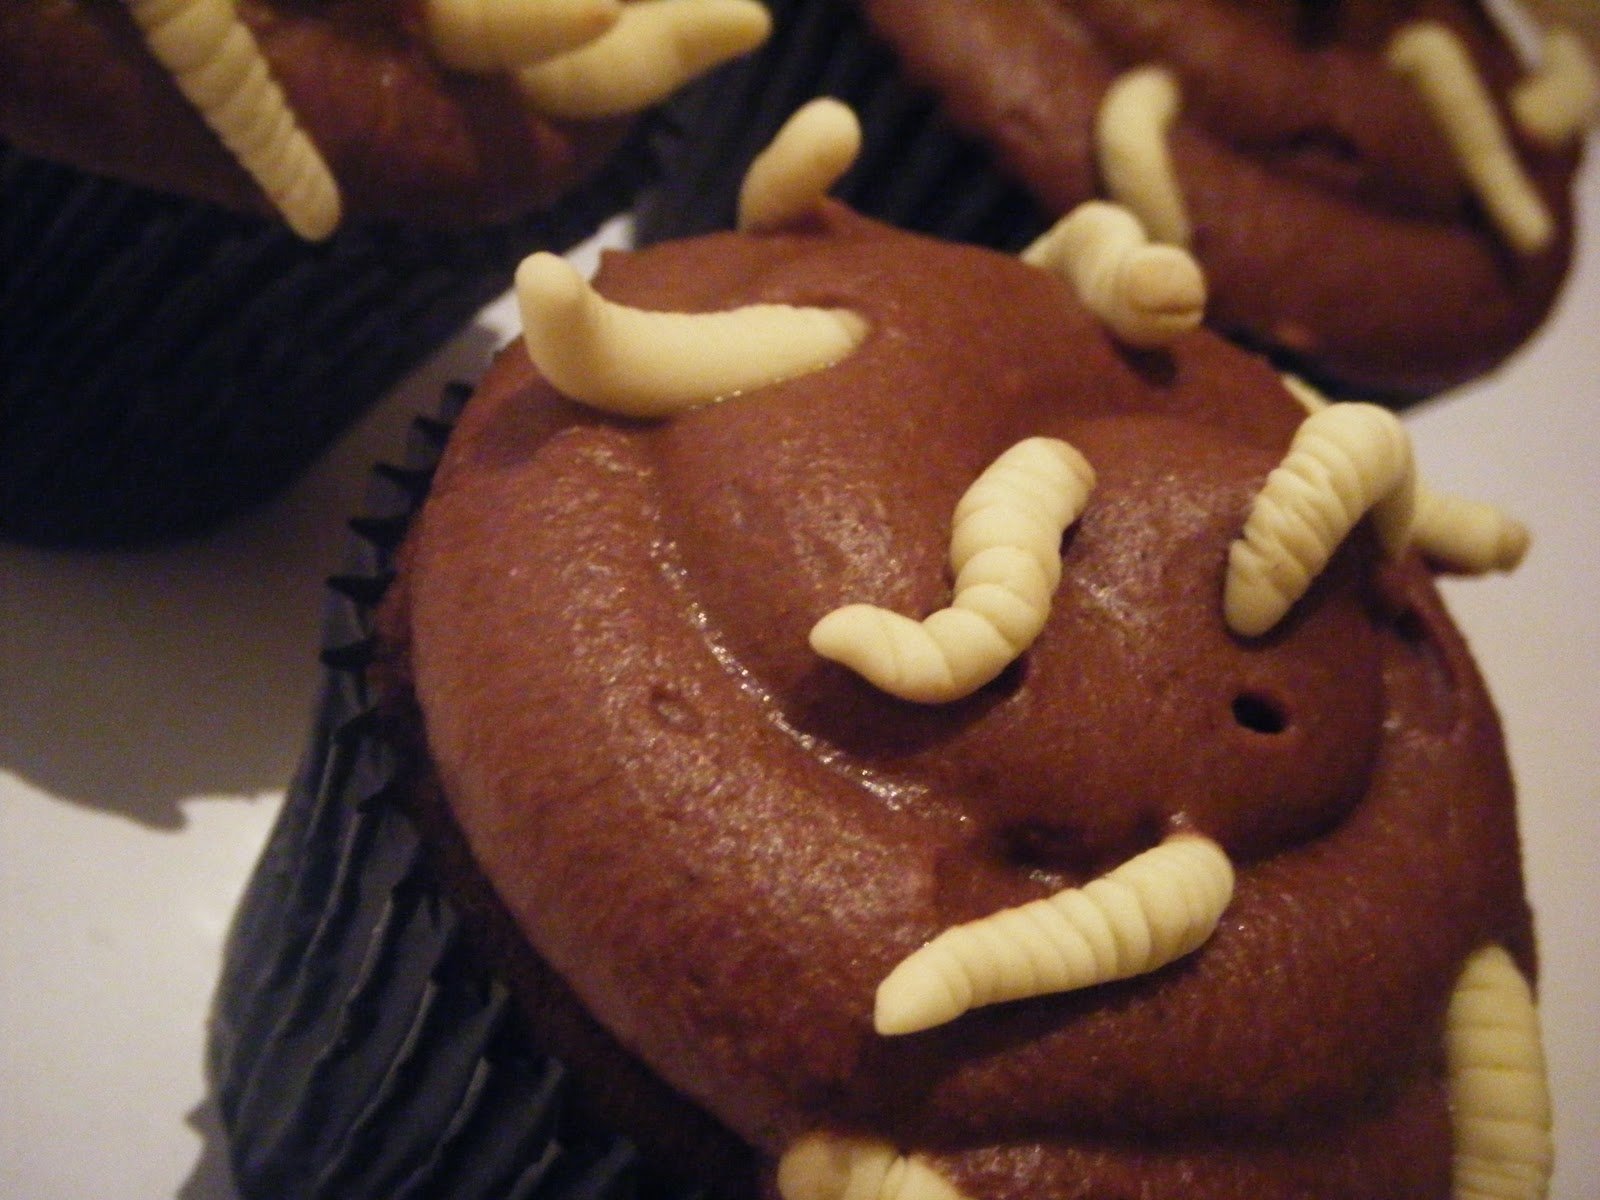 10 Unique Gross Halloween Party Food Ideas gross and disgusting cakes made these maggot infested cupcakes 2022